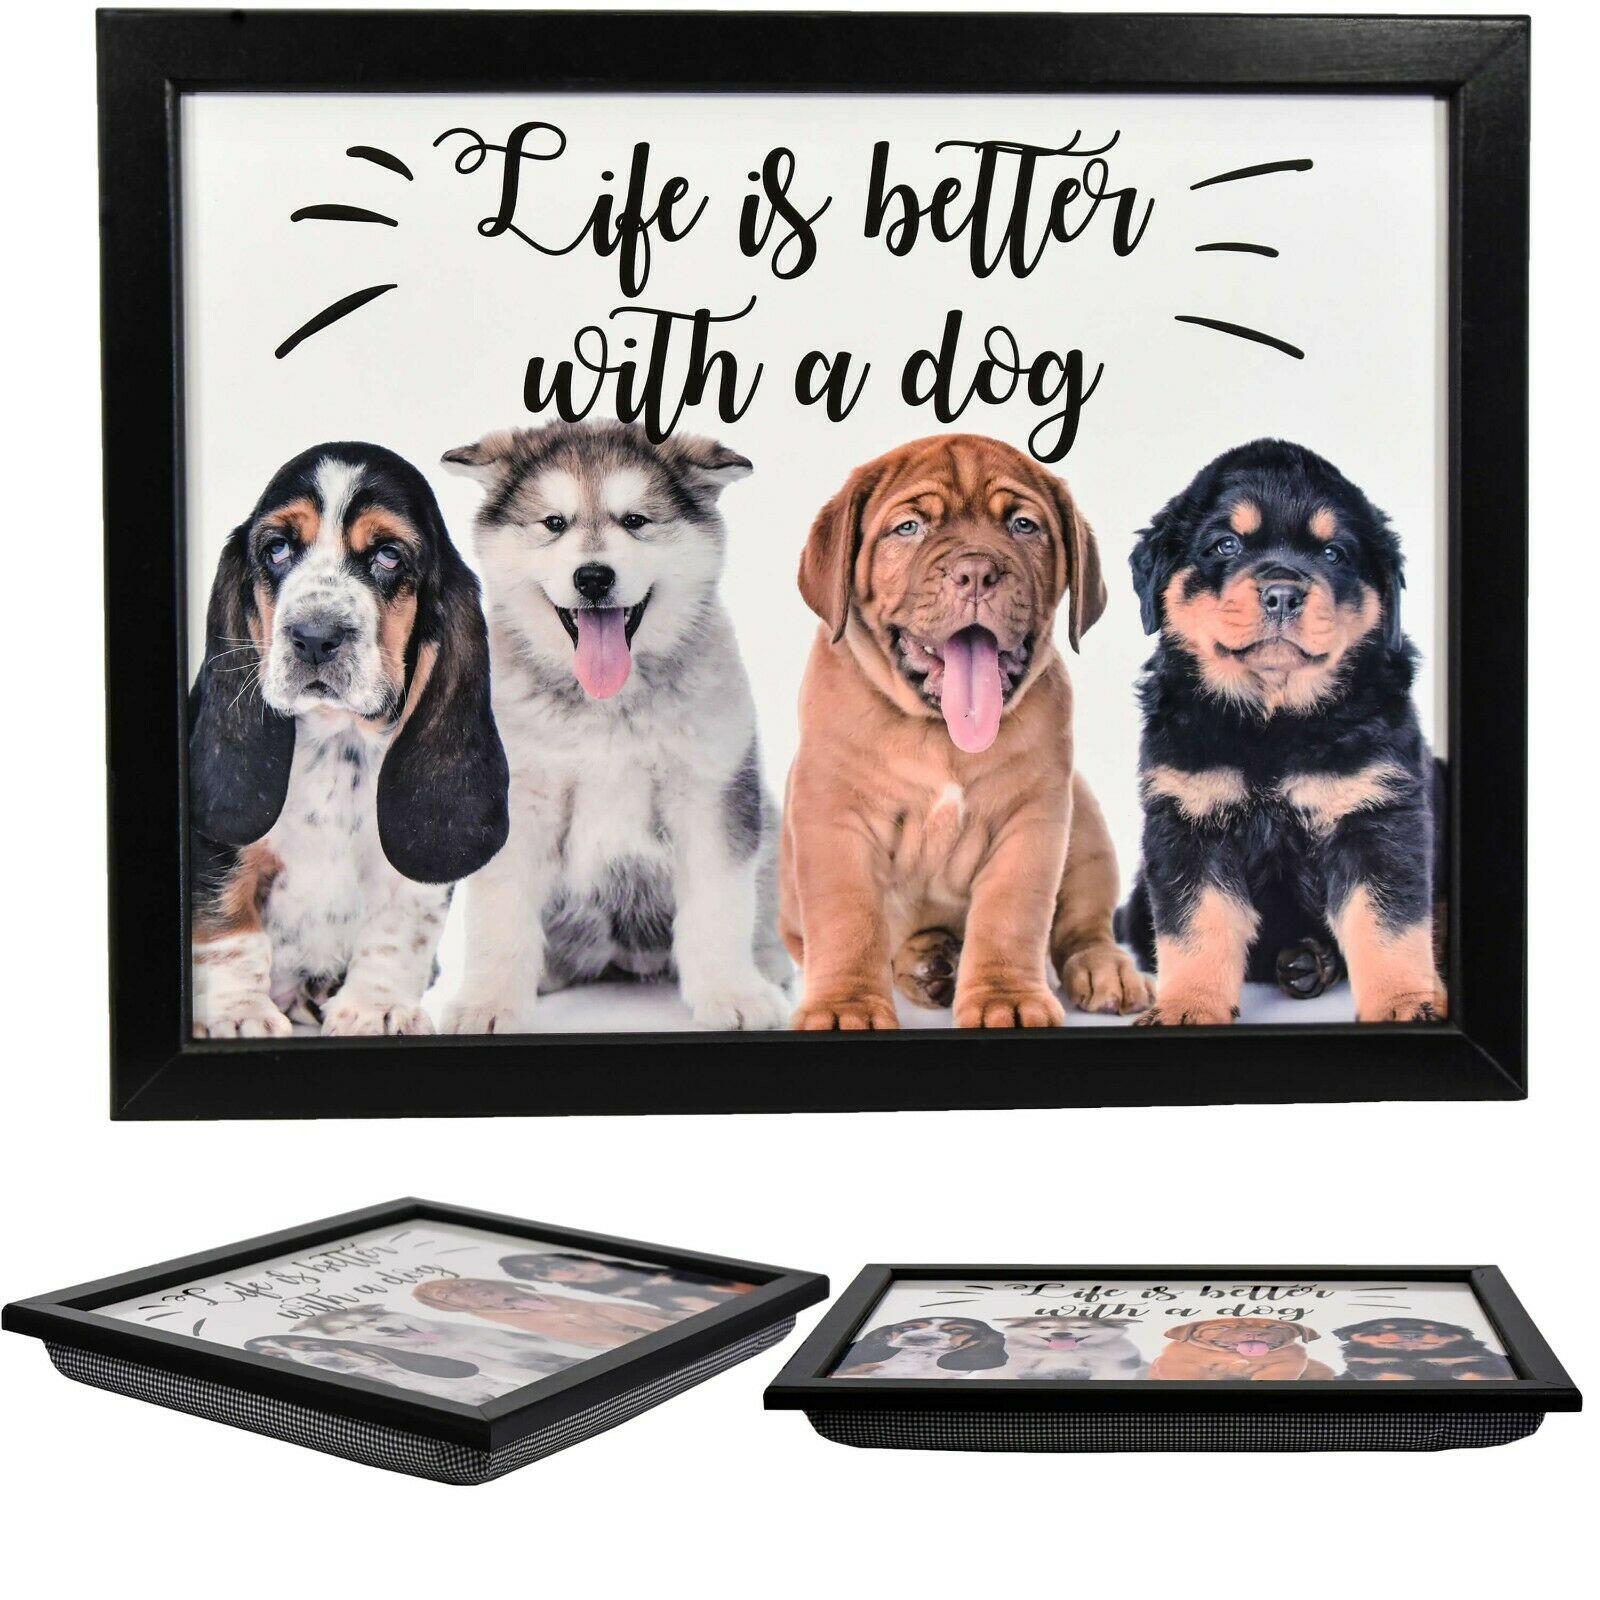 Dogs Lap Tray With Bean Bag Cushion by Geezy - UKBuyZone